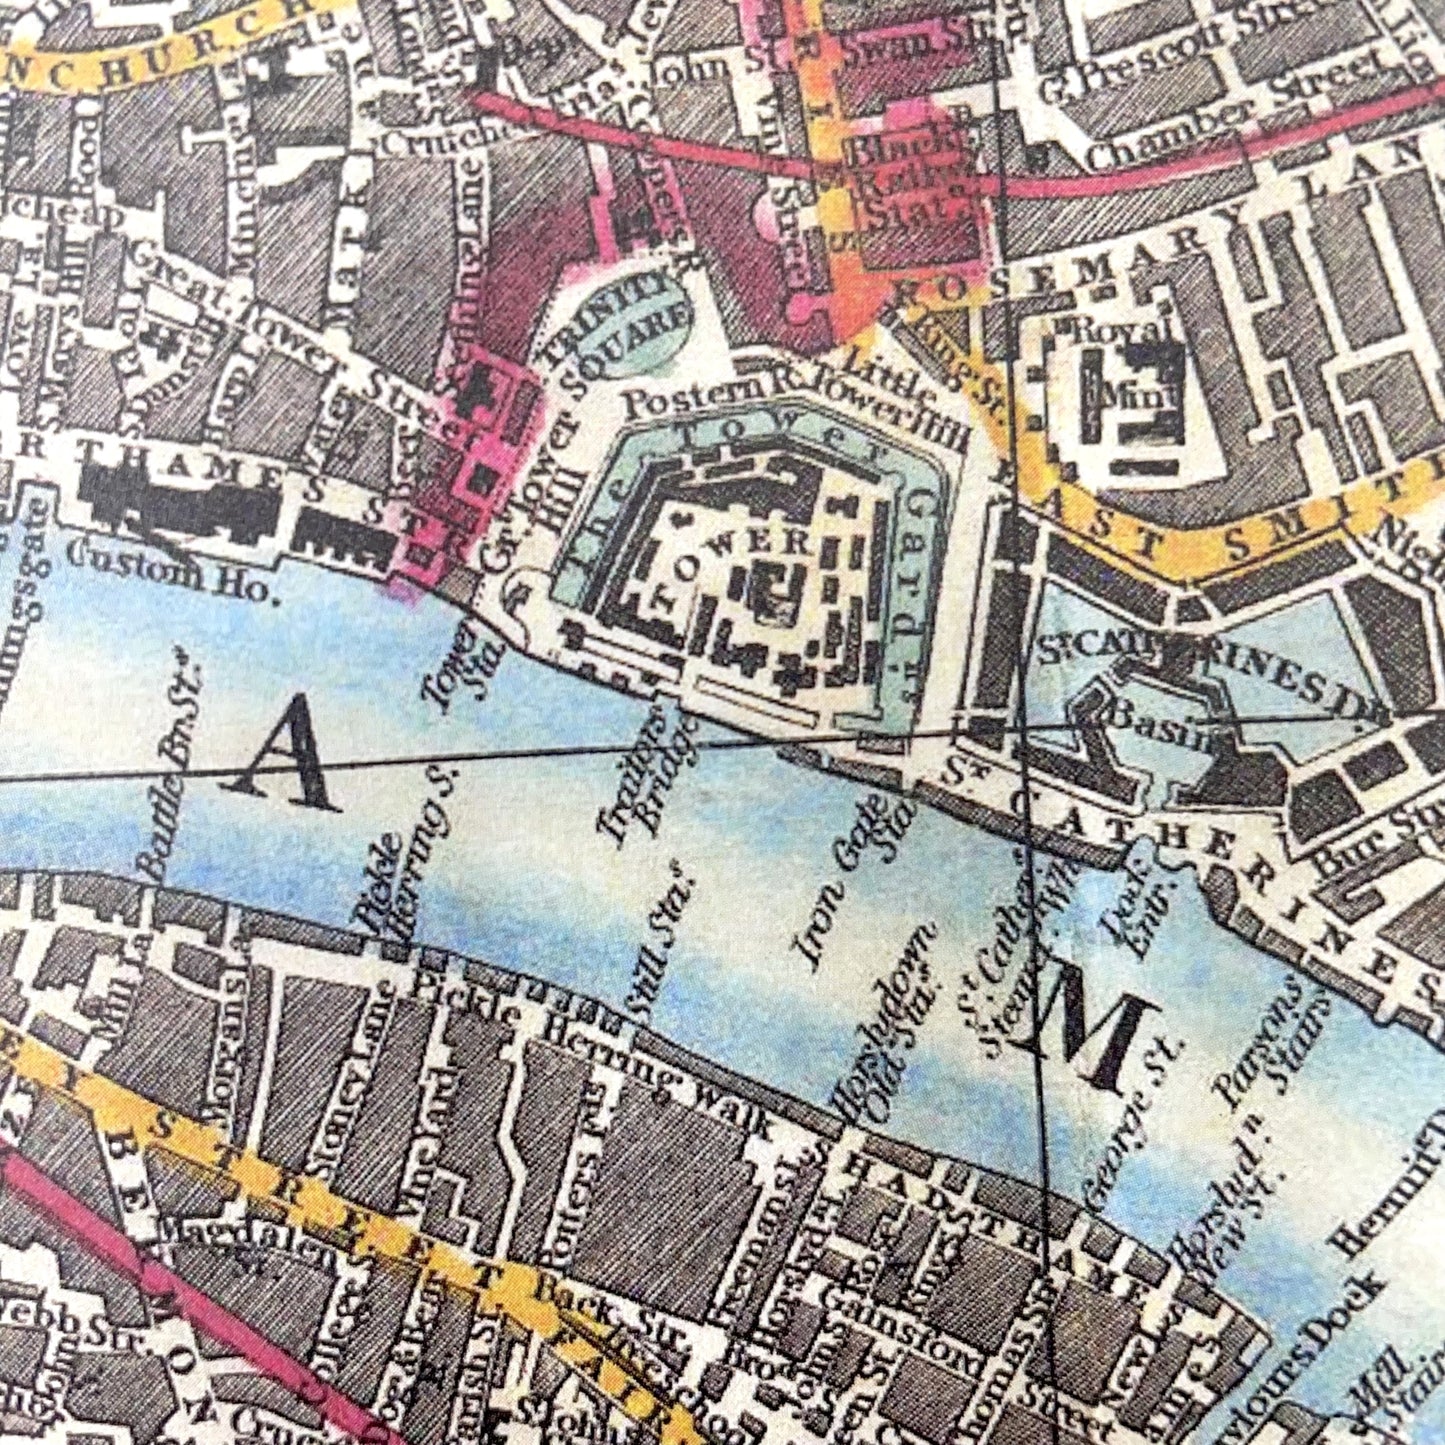 Wrapping paper with a vintage map of London (1848) by George Federick Cruchley. The map shows the proposed developments for London at this time and extends from Hyde Park in the west to the Docklands in the East, detail of The Tower of London